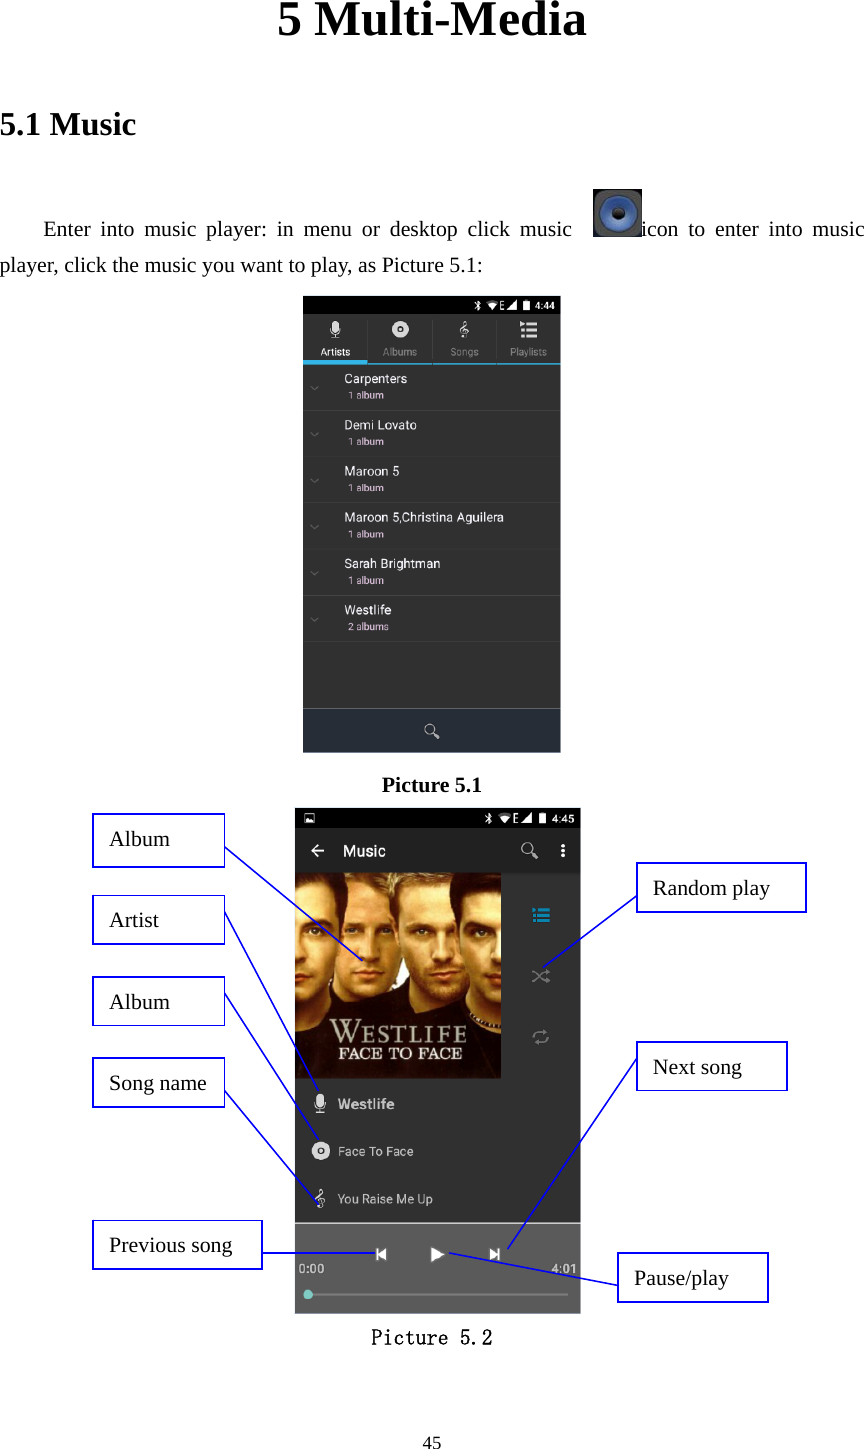     455 Multi-Media 5.1 Music Enter into music player: in menu or desktop click music   icon to enter into music player, click the music you want to play, as Picture 5.1:    Picture 5.1    Picture 5.2  Album Pause/play Next song Previous song Artist Album Song name Random play 